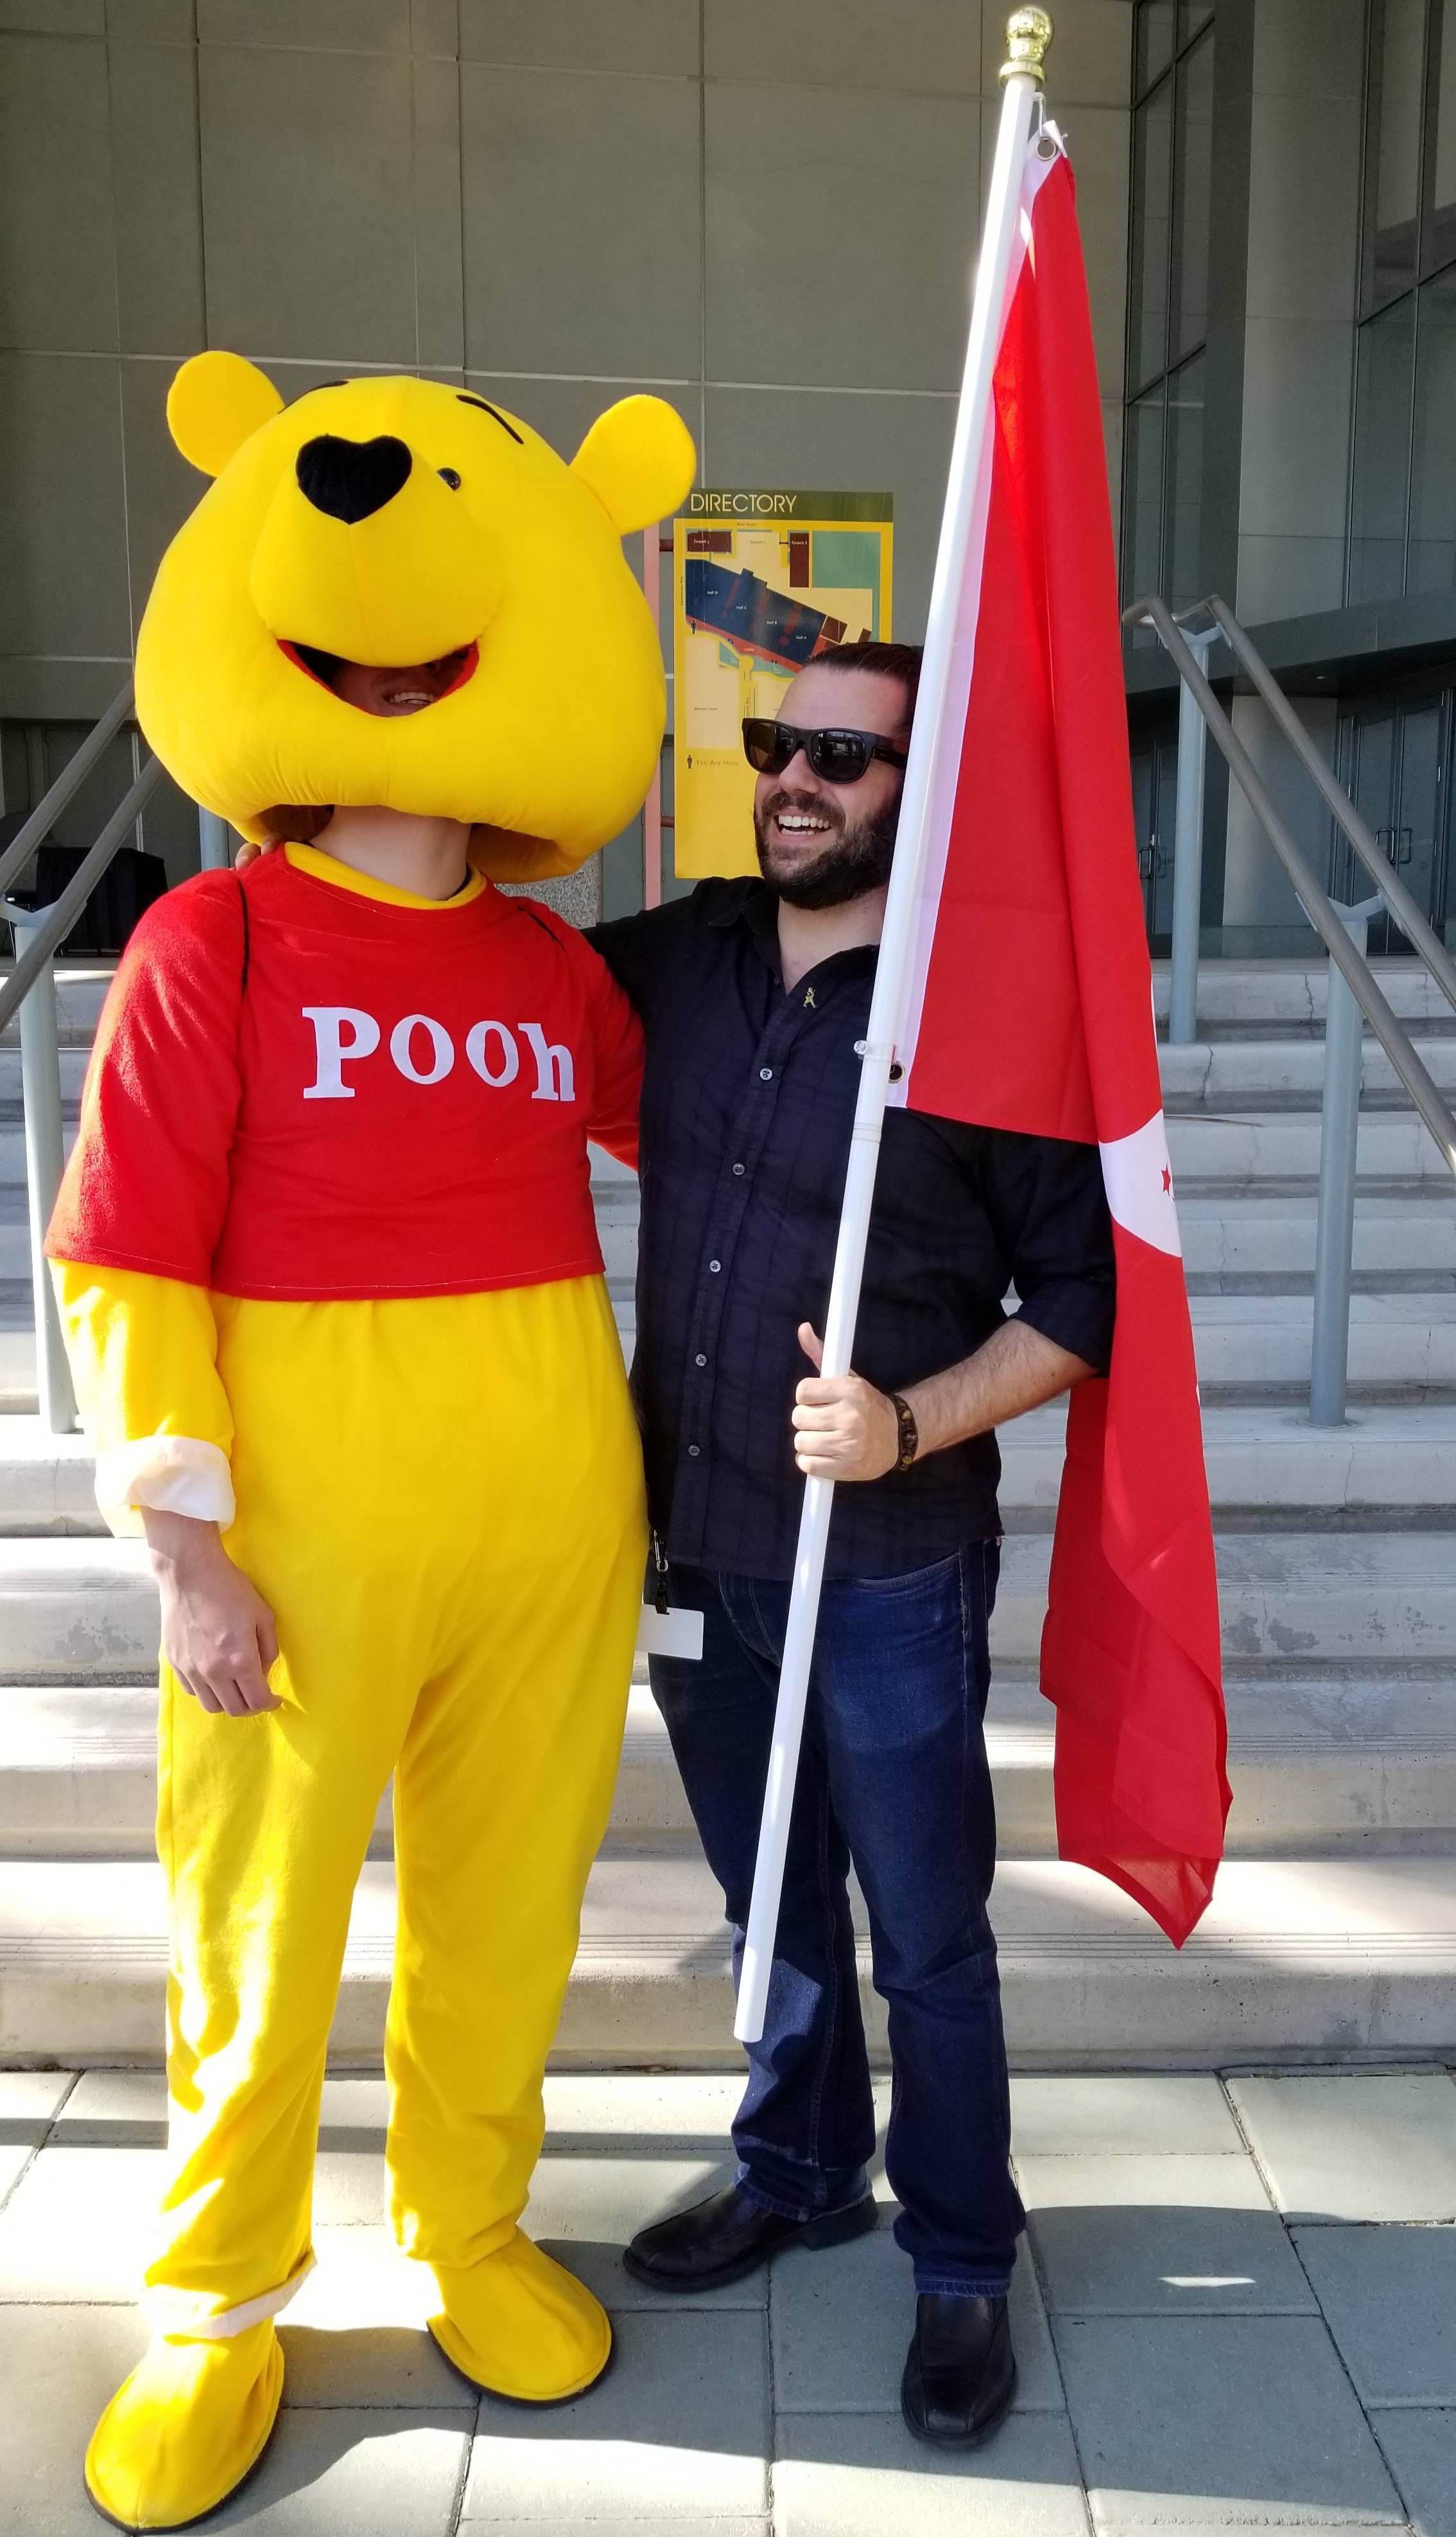 Found Winnie the Pooh waving the Hong Kong flag in front of BlizzCon.